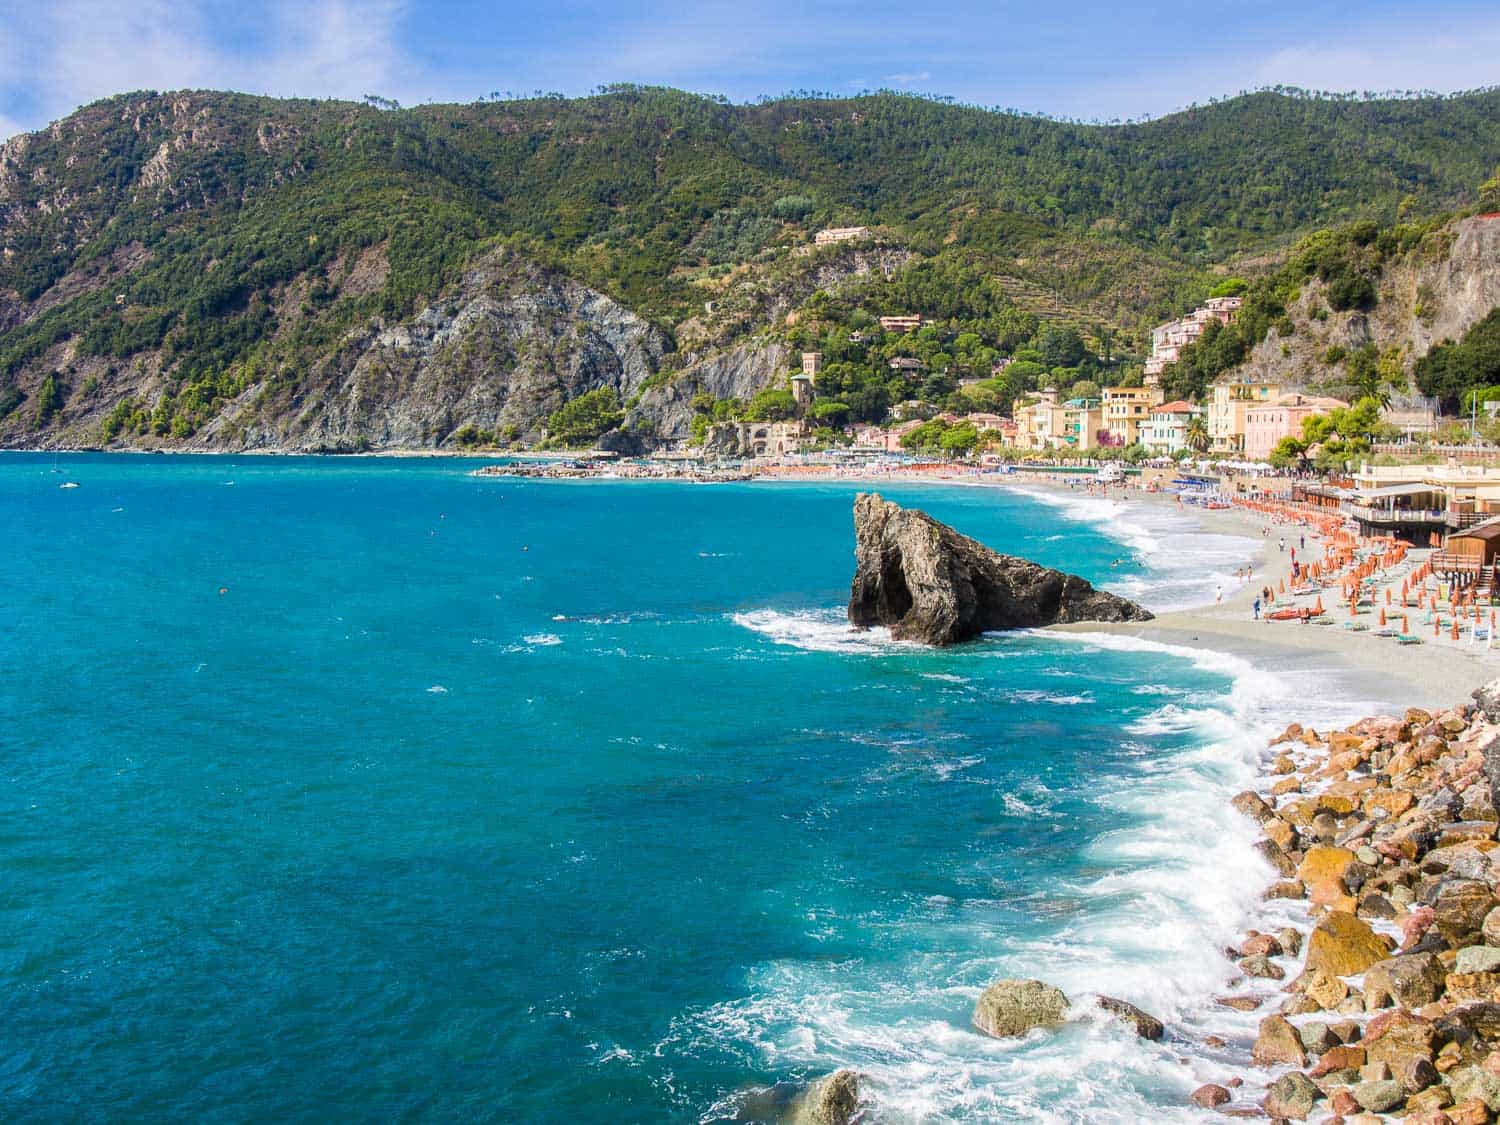 The beach at Monterosso one of the Cinque Terre villages